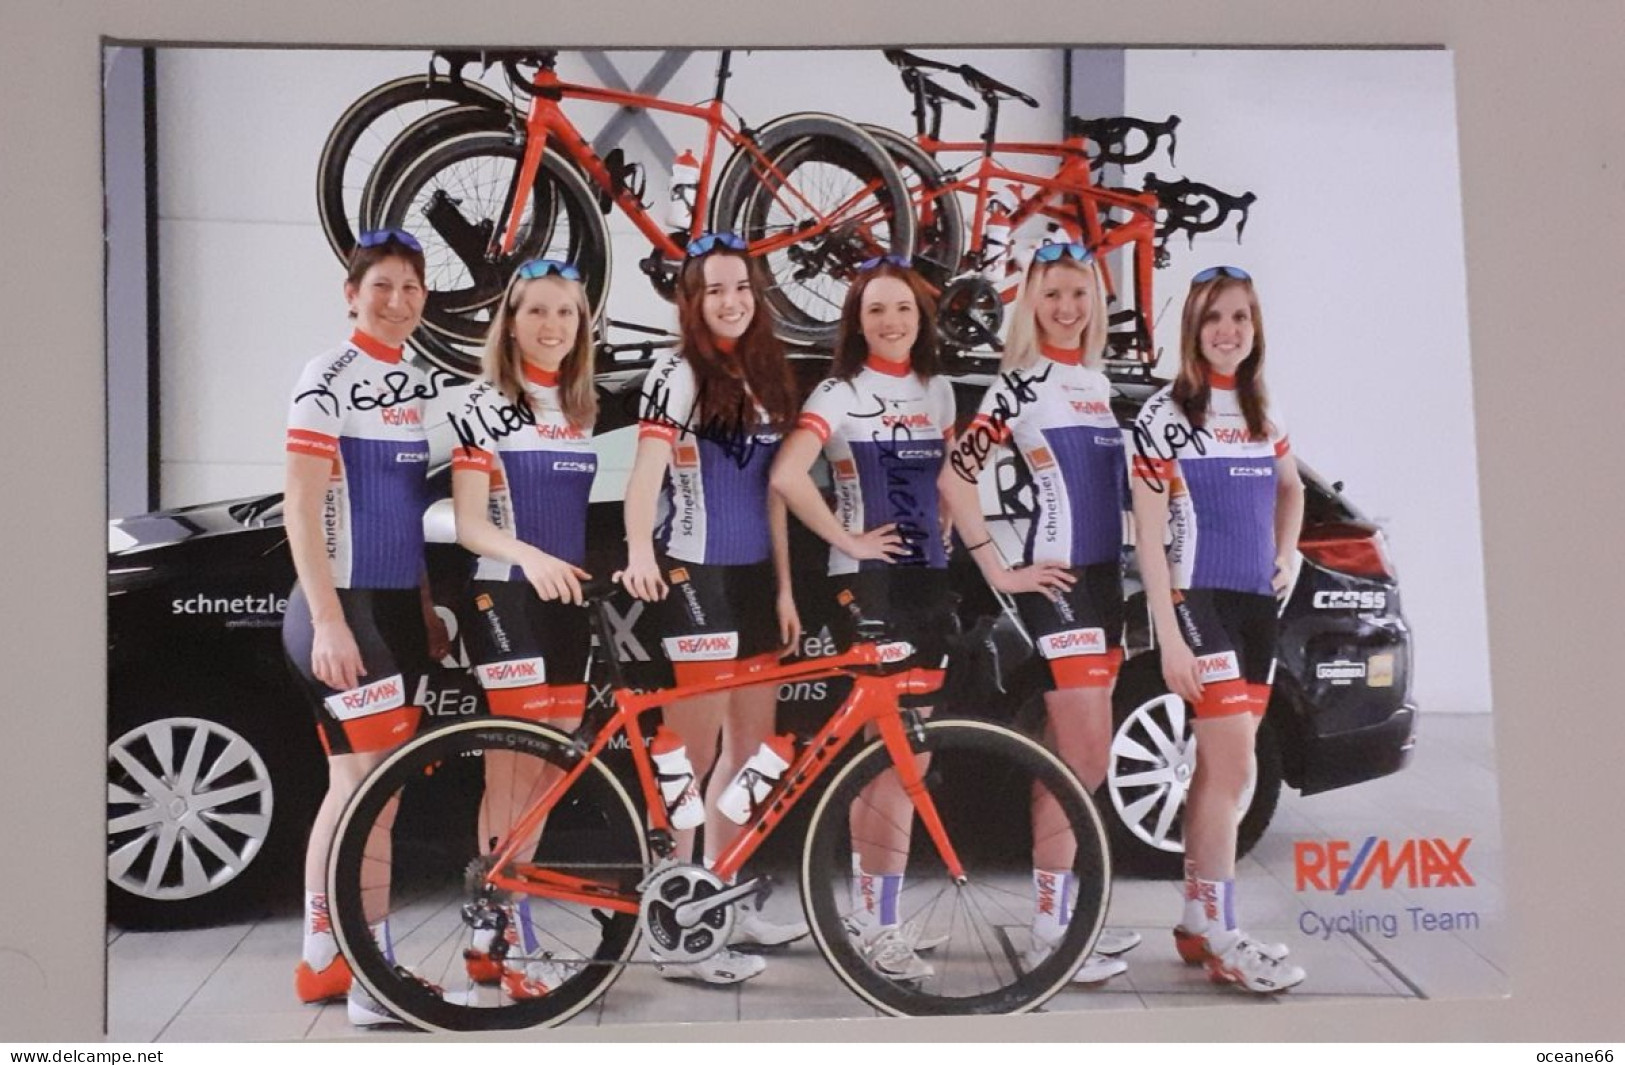 Autographes Equipe Remax Format A5 - Cycling